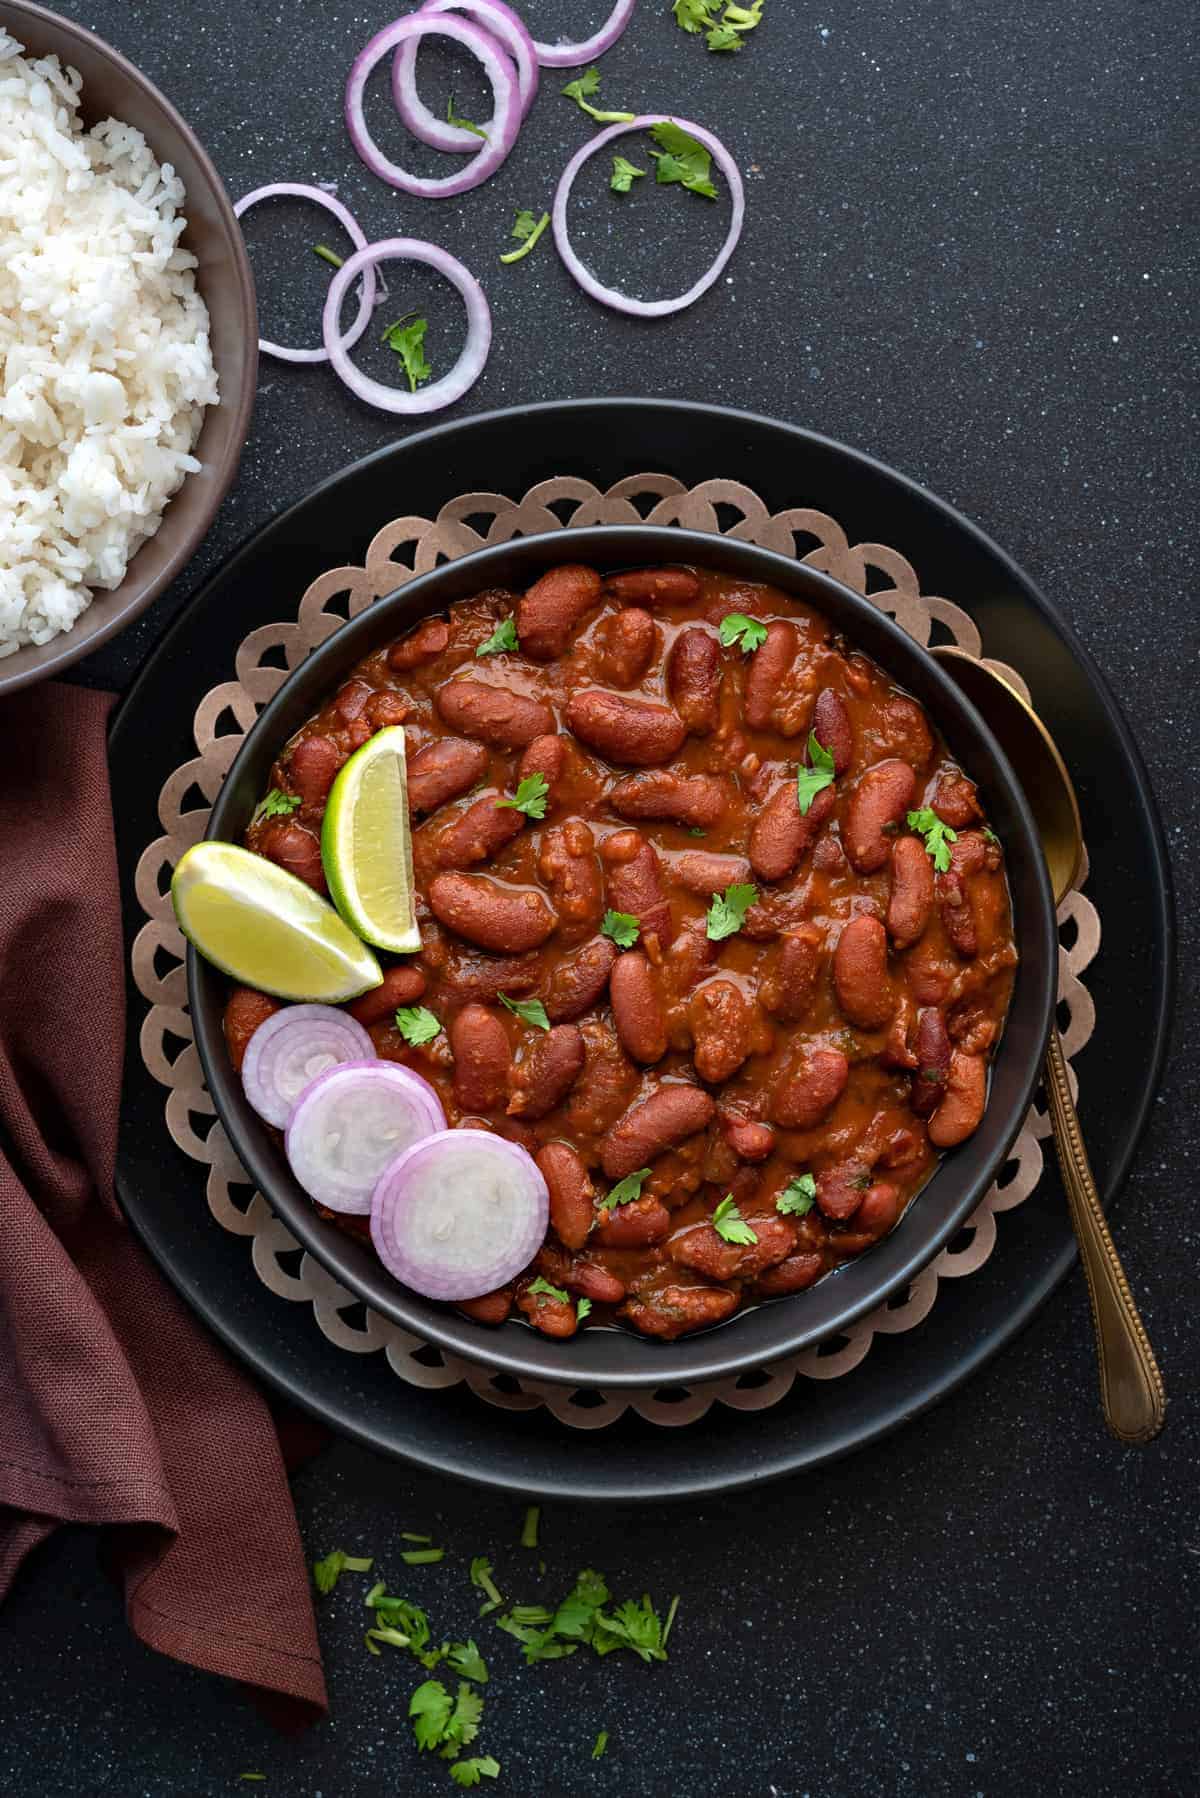 Punjabi Rajma masala served in black plate with a spoon into it.